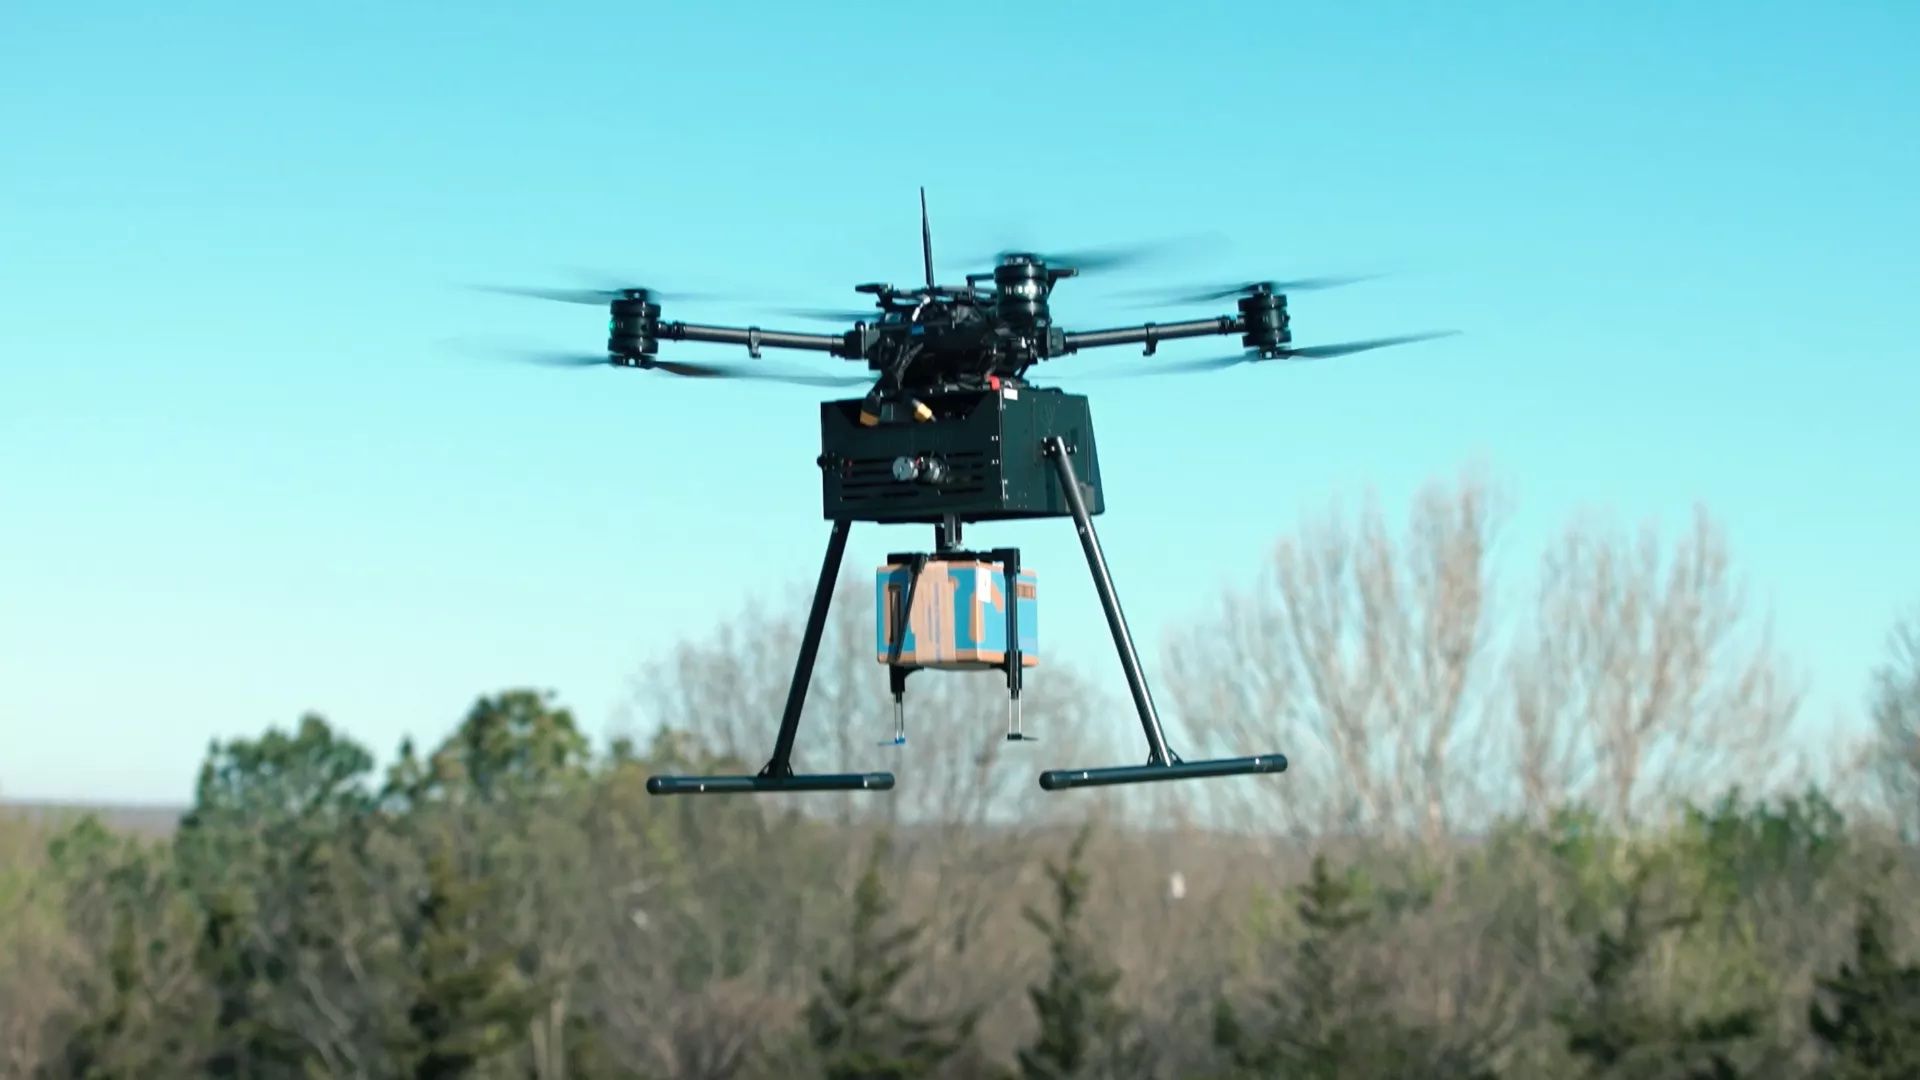 A delivery drone comes in for a landing.